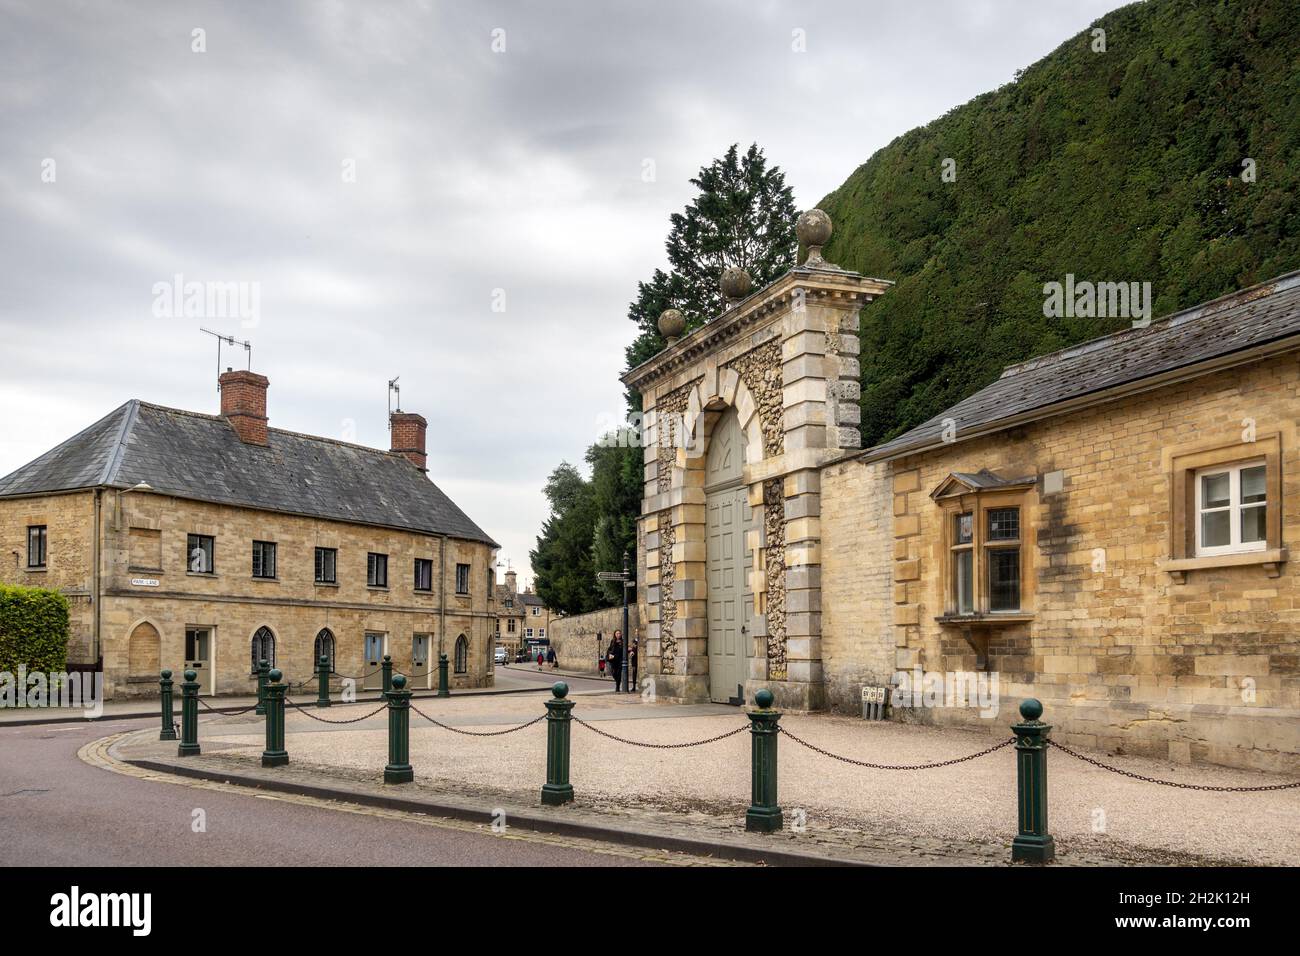 Bathurst Estate entrance and tall yew tree hedge at Park Street, Cirencester, Gloucestershire, England Stock Photo